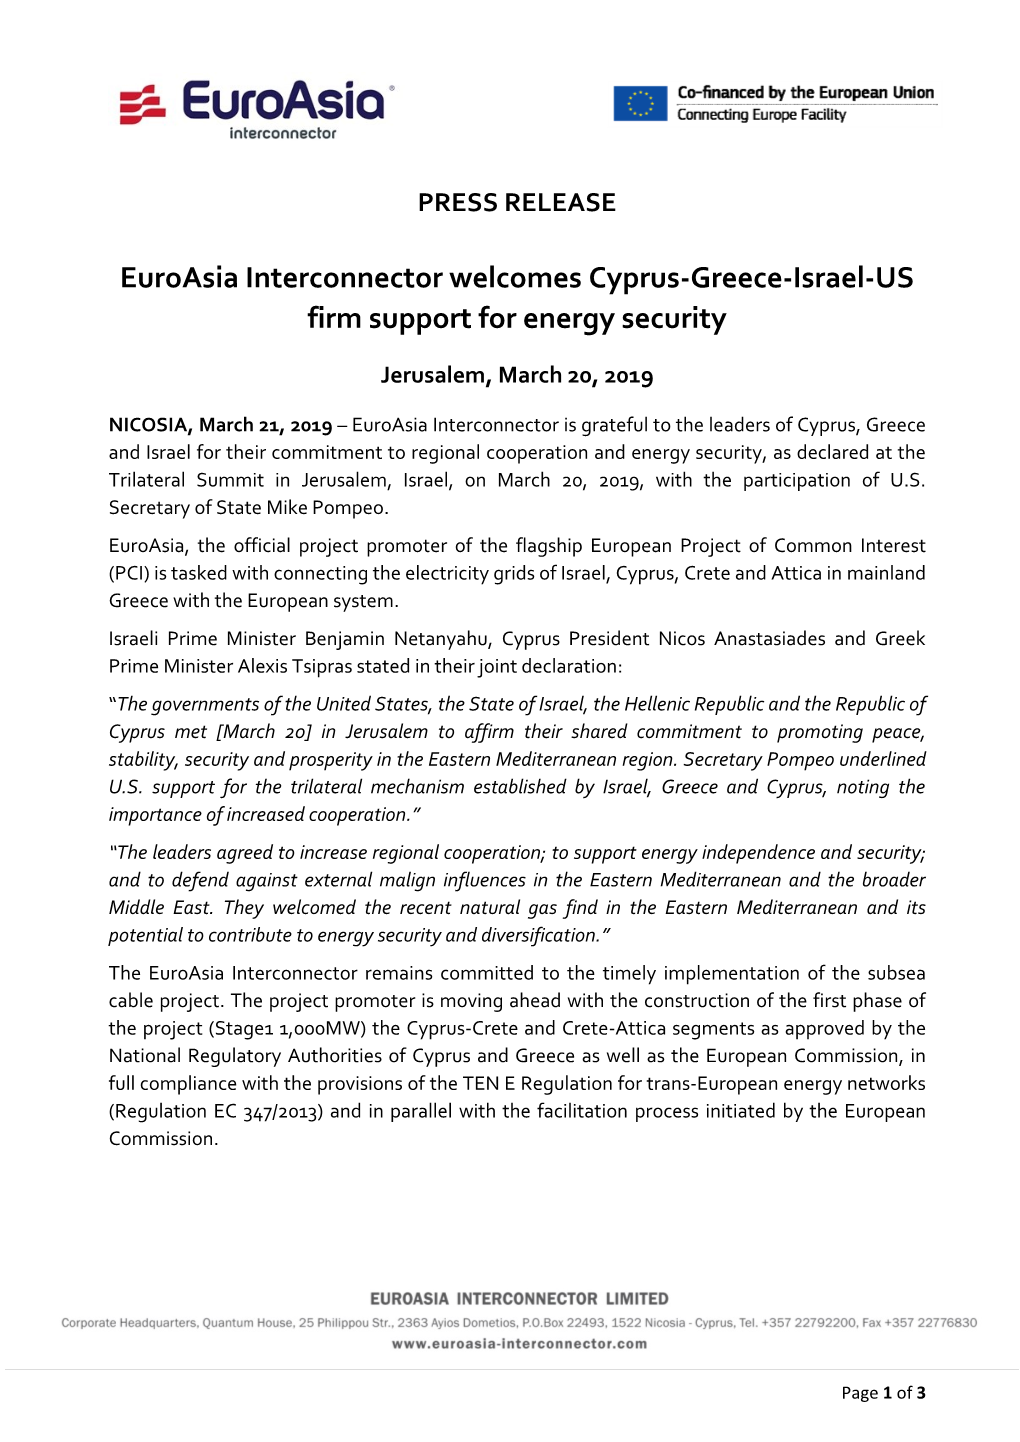 Euroasia Interconnector Welcomes Cyprus-Greece-Israel-US Firm Support for Energy Security